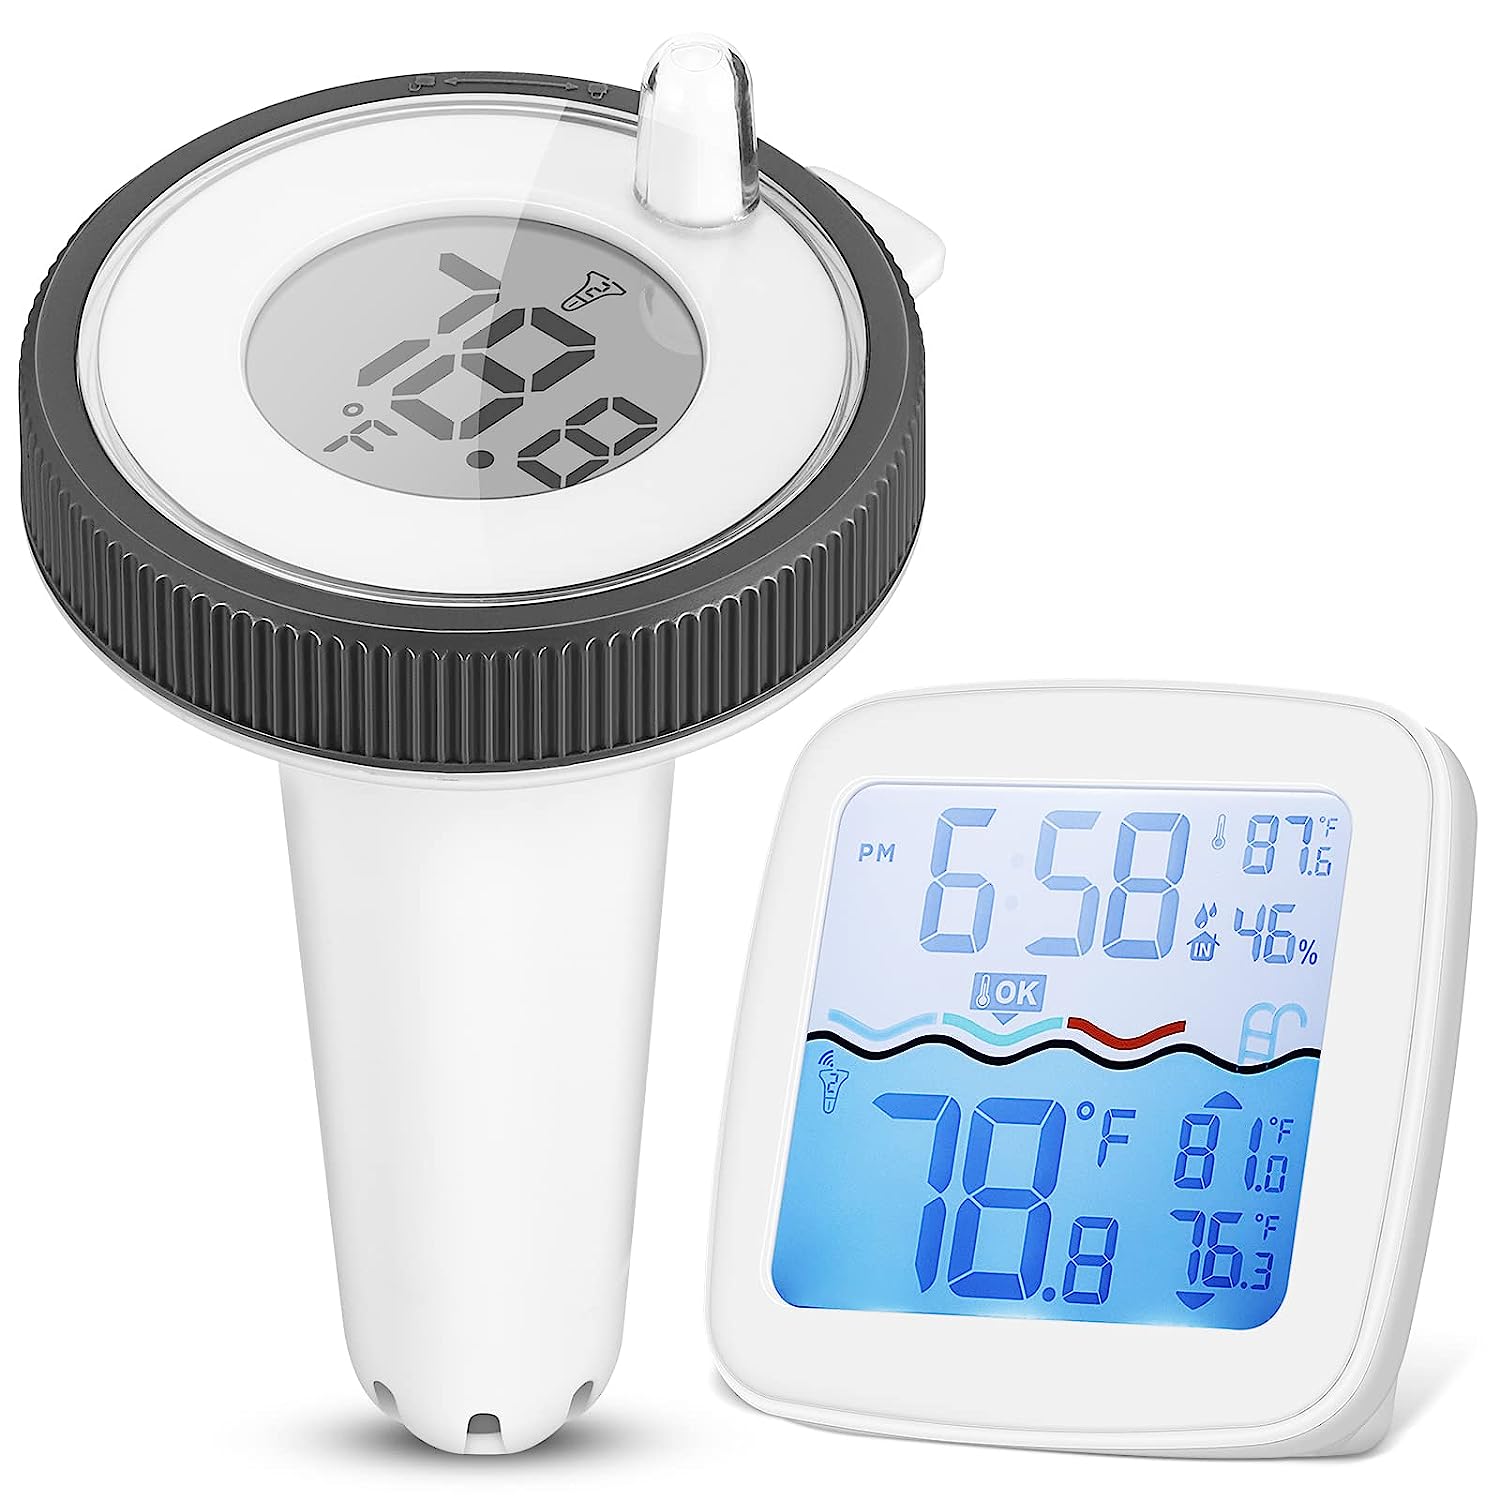 Pool Thermometer, Pool Thermometer Floating Easy Read [...]